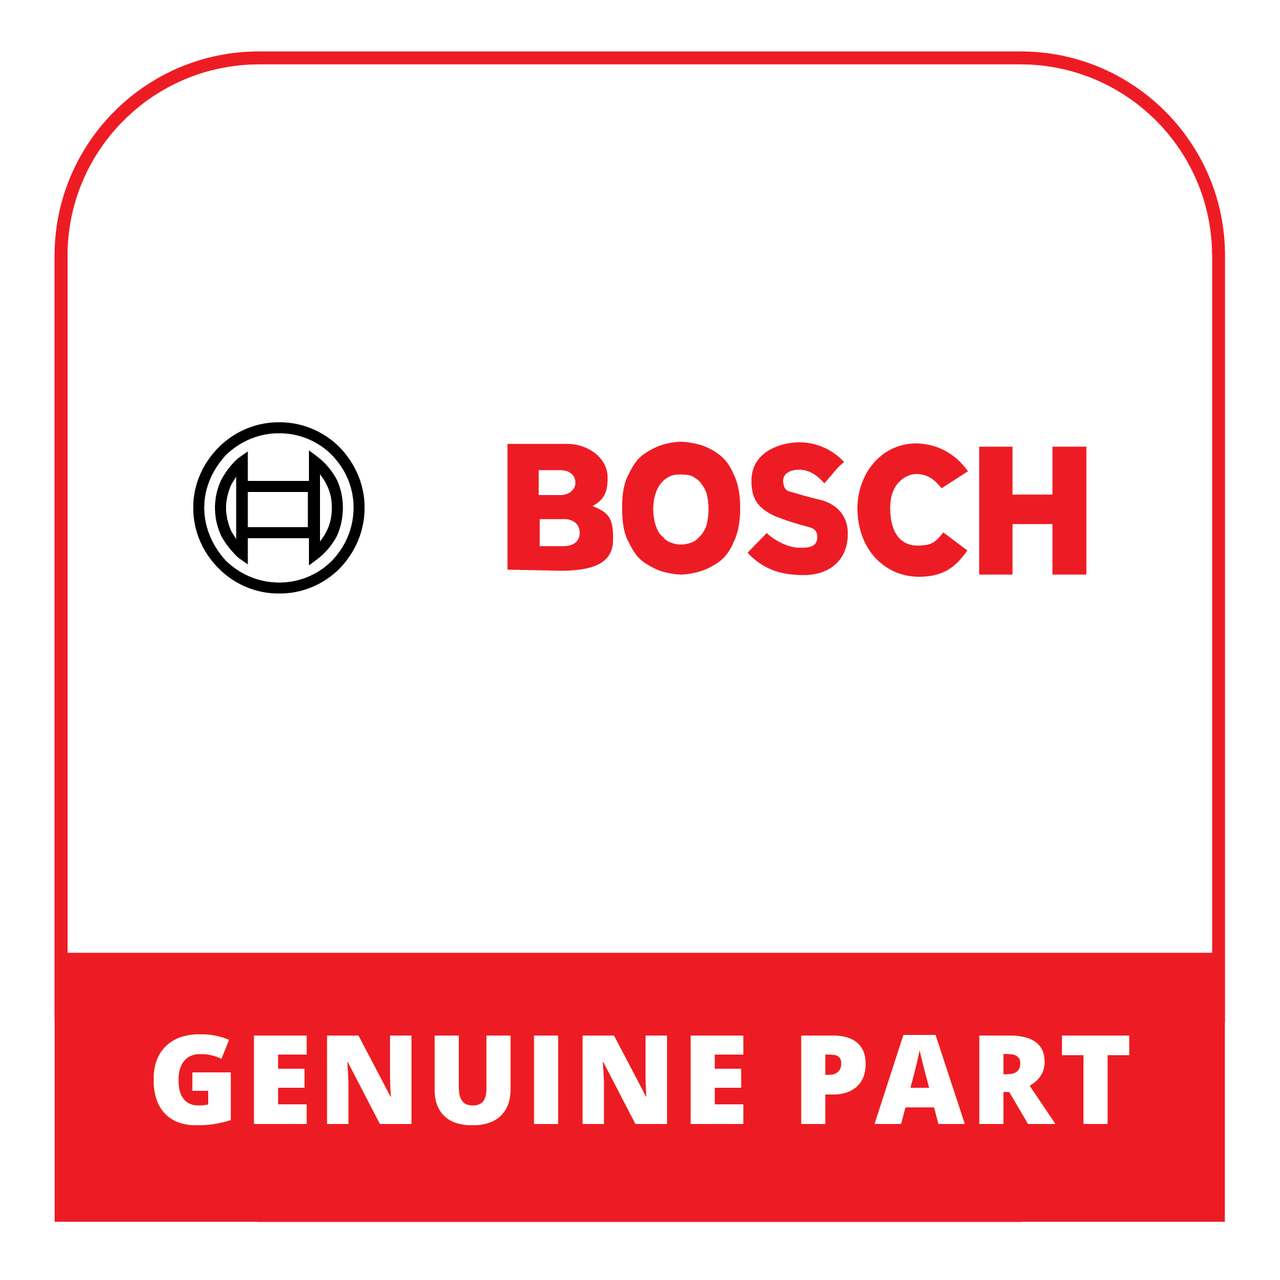 Bosch (Thermador) 10005716 - Valve-Magnet - Genuine Bosch (Thermador) Part